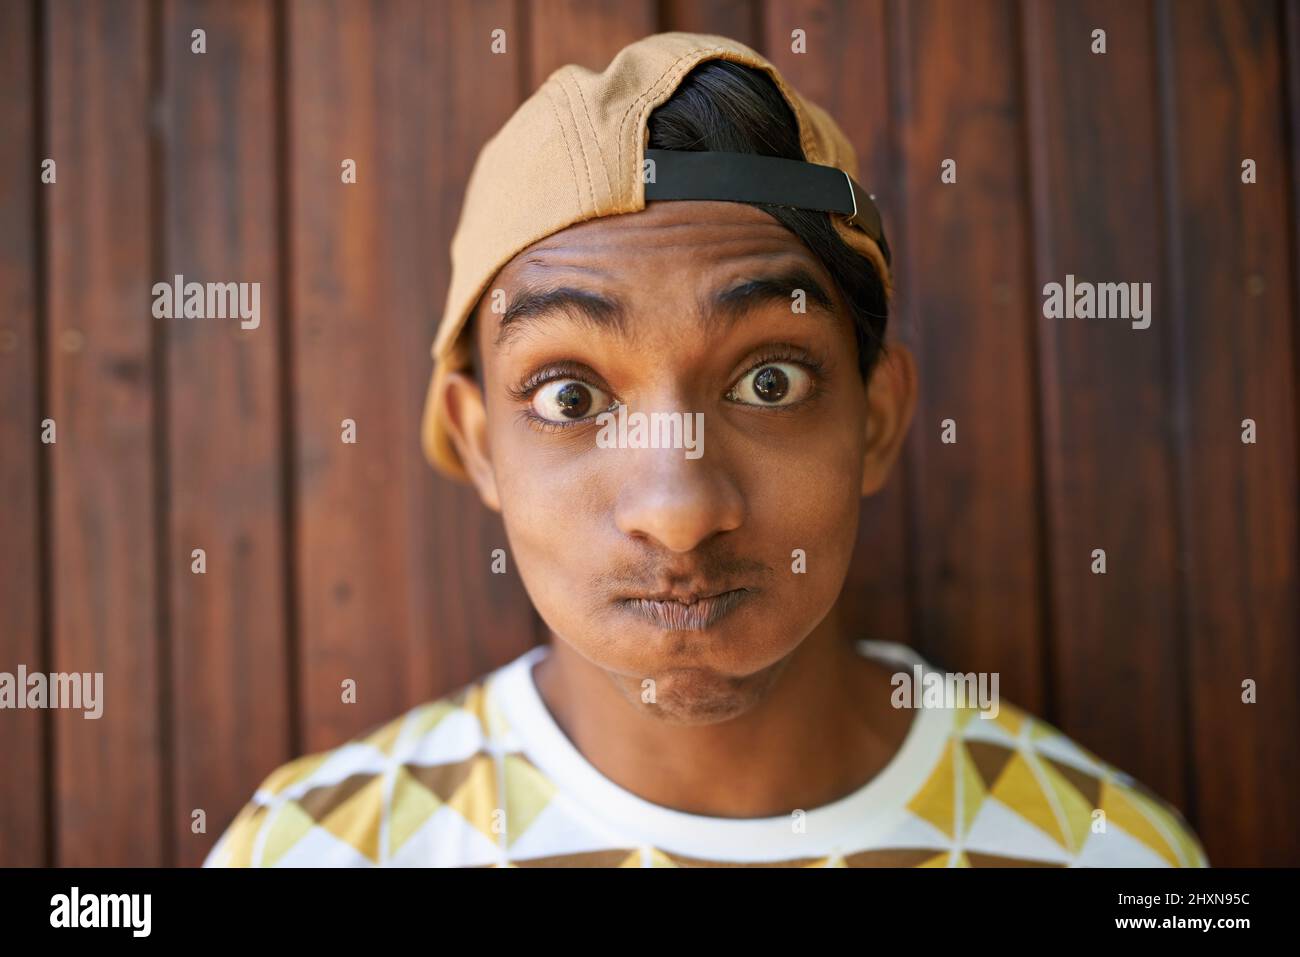 Never be too serious. Portrait of a teenage boy making a face while standing against a wooden wall. Stock Photo